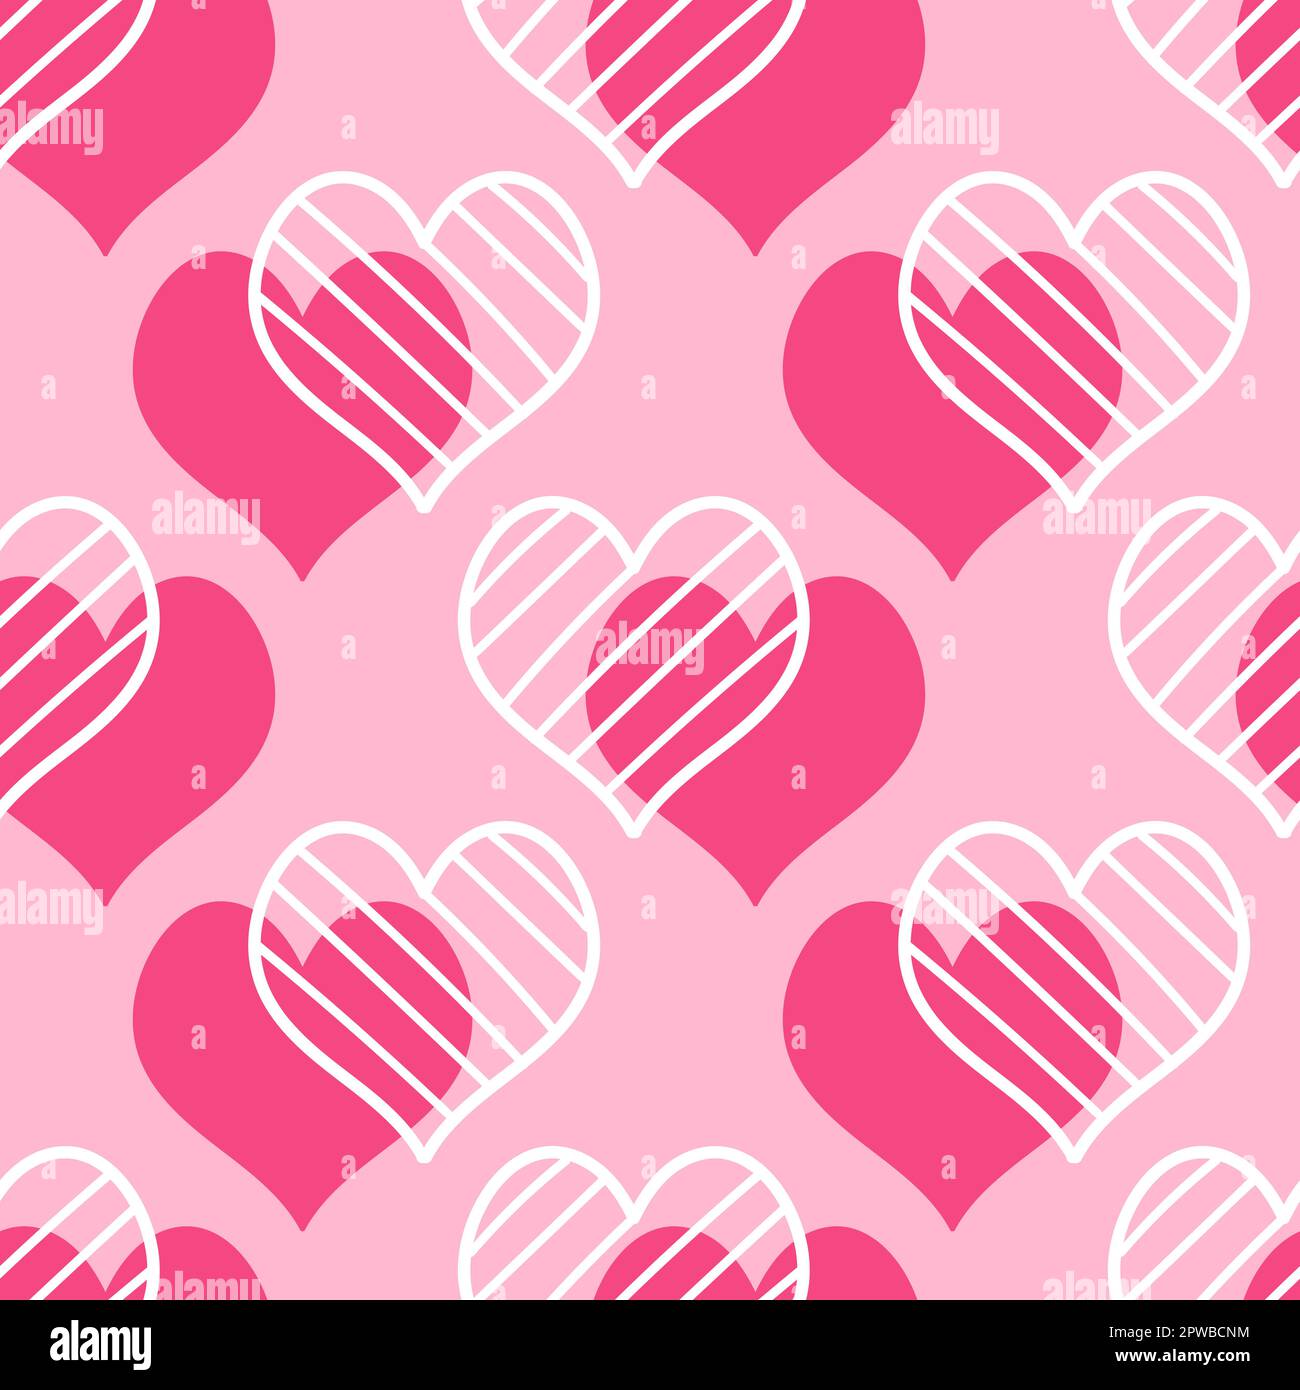 Canvas Print Cute valentines elements and words seamless pattern with pink  background 